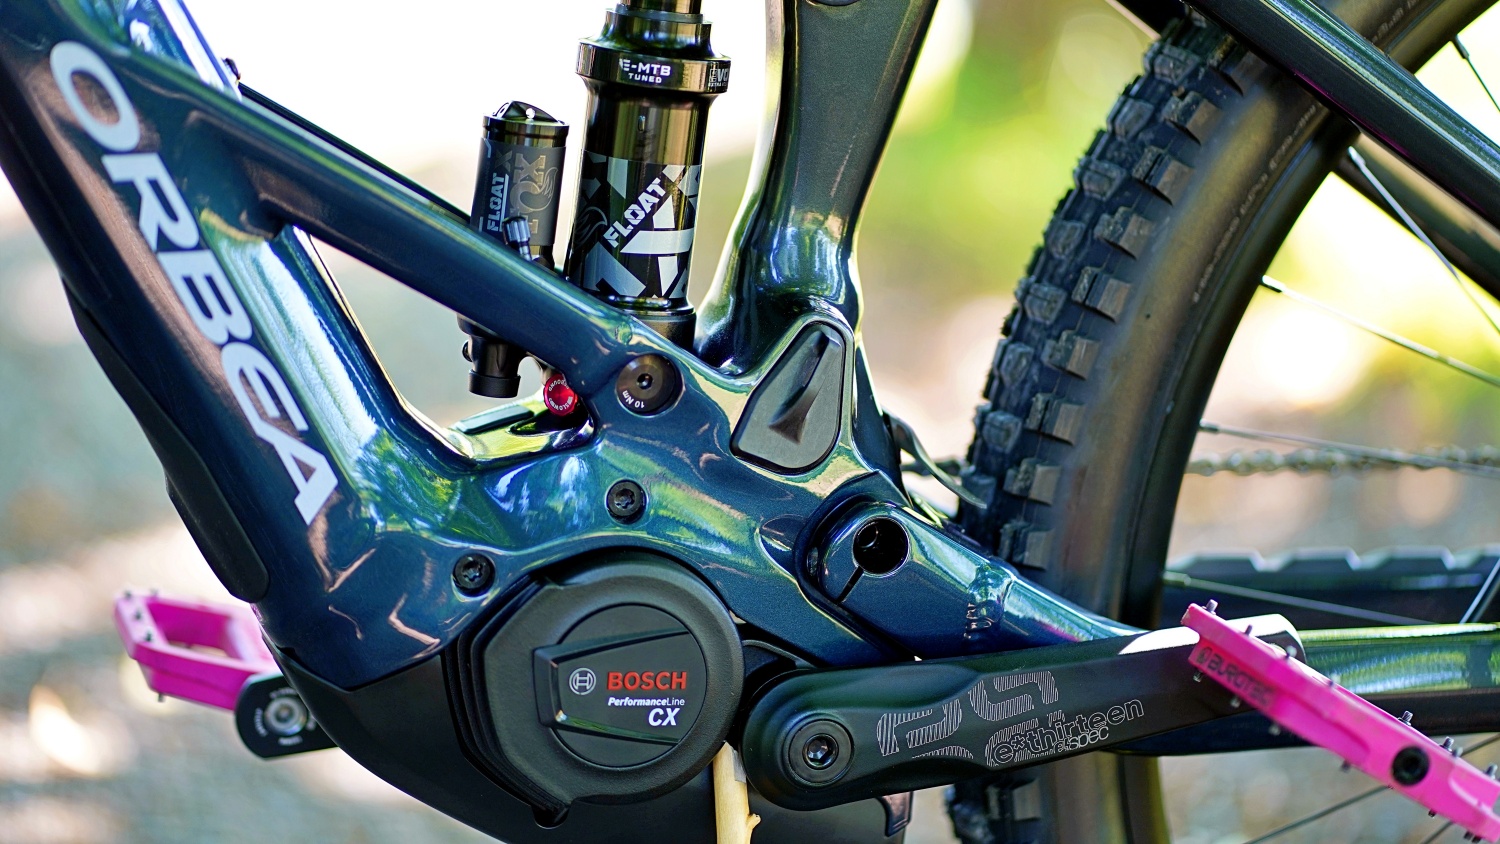 The Bosch Performance CX and the Fox Float X shock